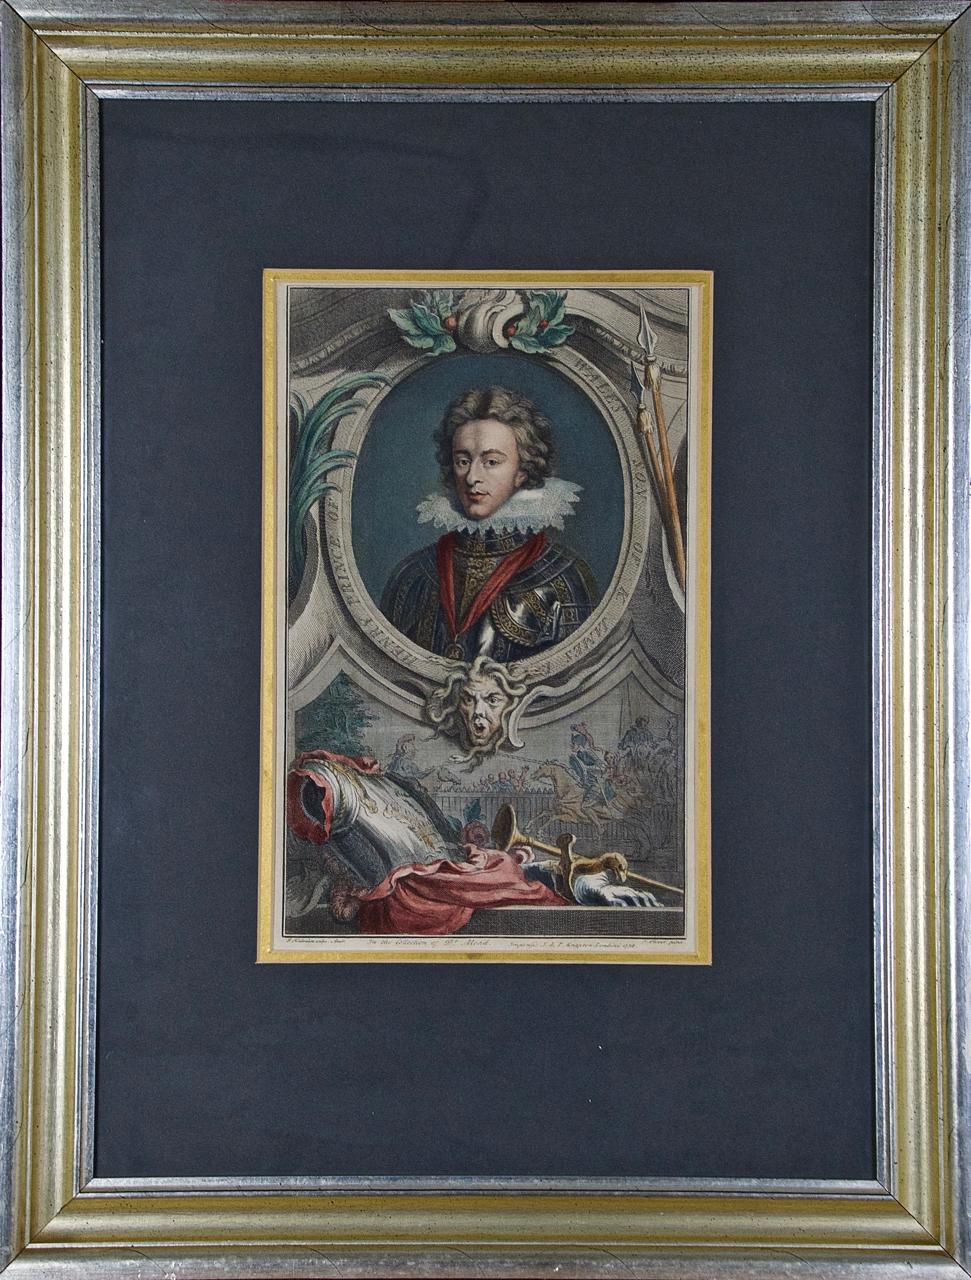 Hand-Colored Houbraken Portrait of "Henry, Prince of Wales, Son of James" 